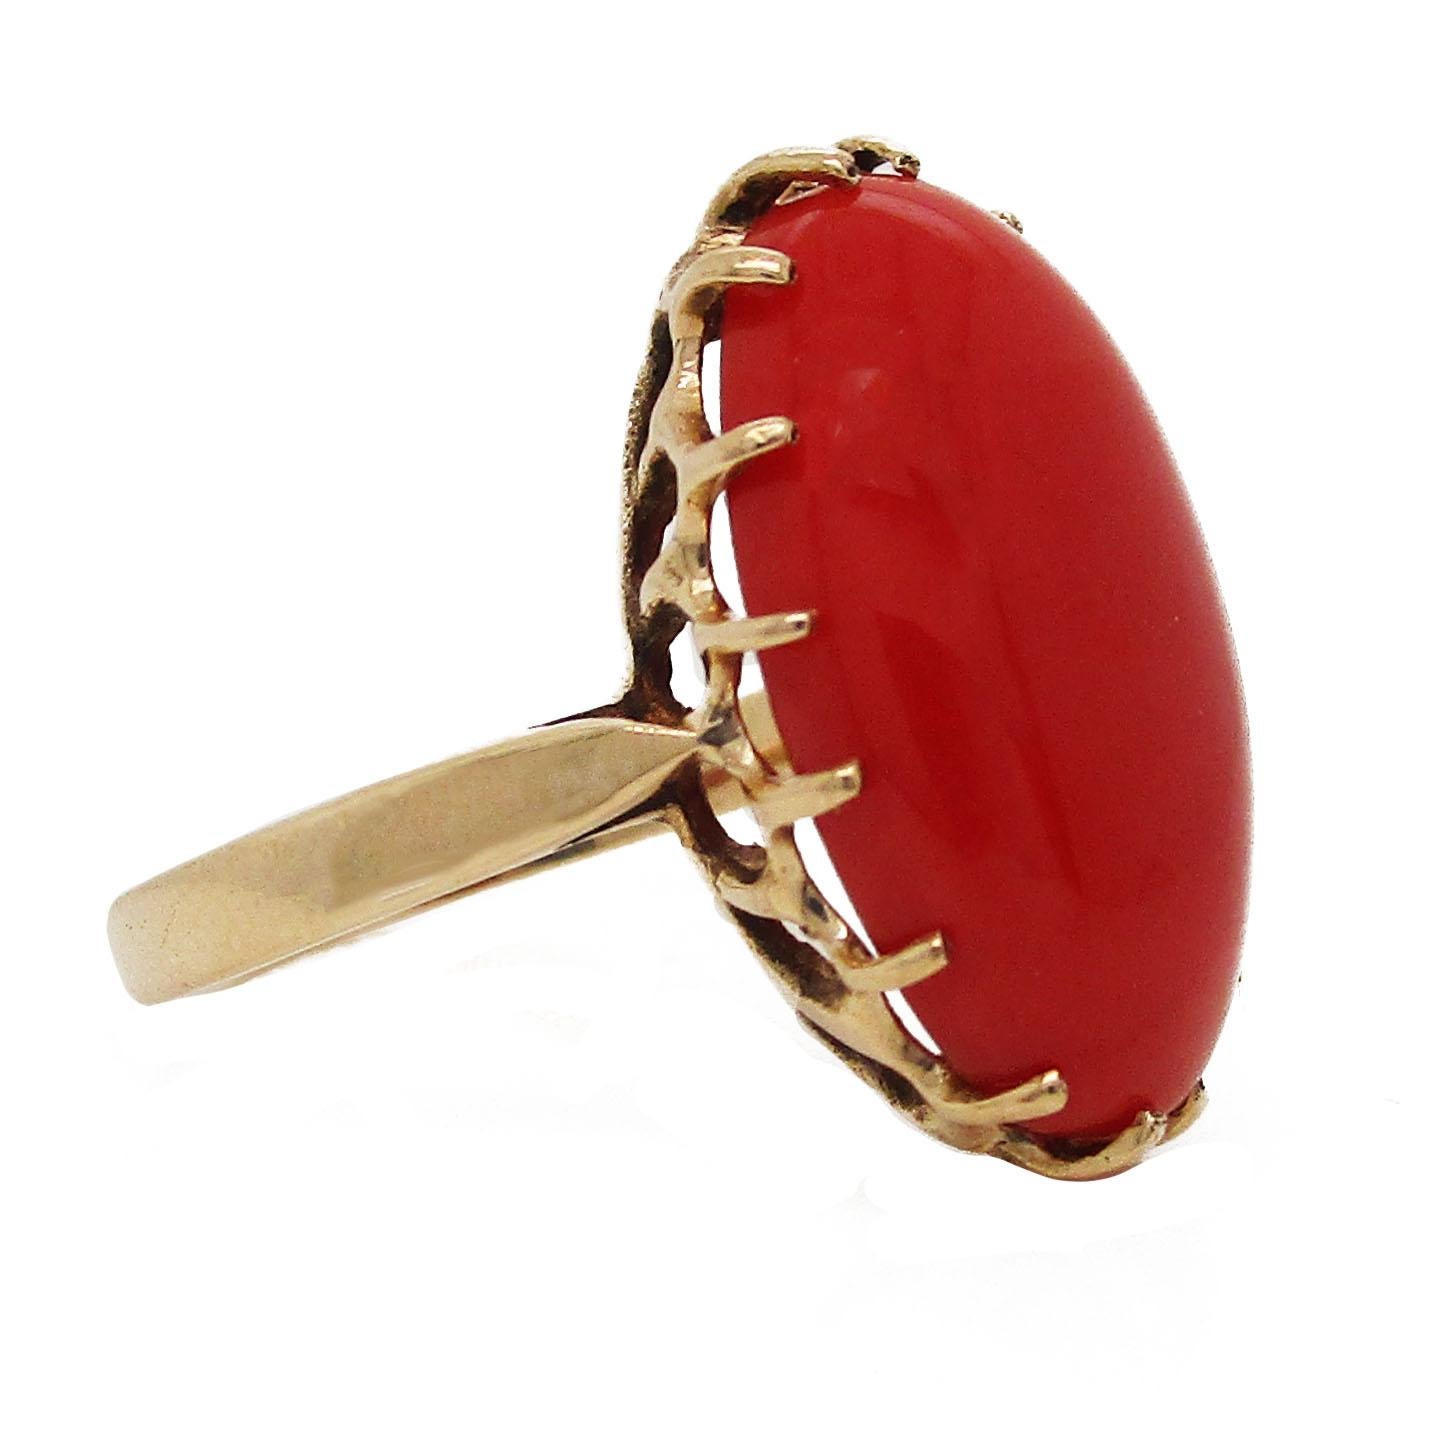 This 1890 Victorian ring pairs bright 14k yellow gold with a red coral cabochon whose natural color will take your breath away! The 14k yellow gold ring stretches into a two-layered pierced undergallery. The open layout of the ring exposes the back